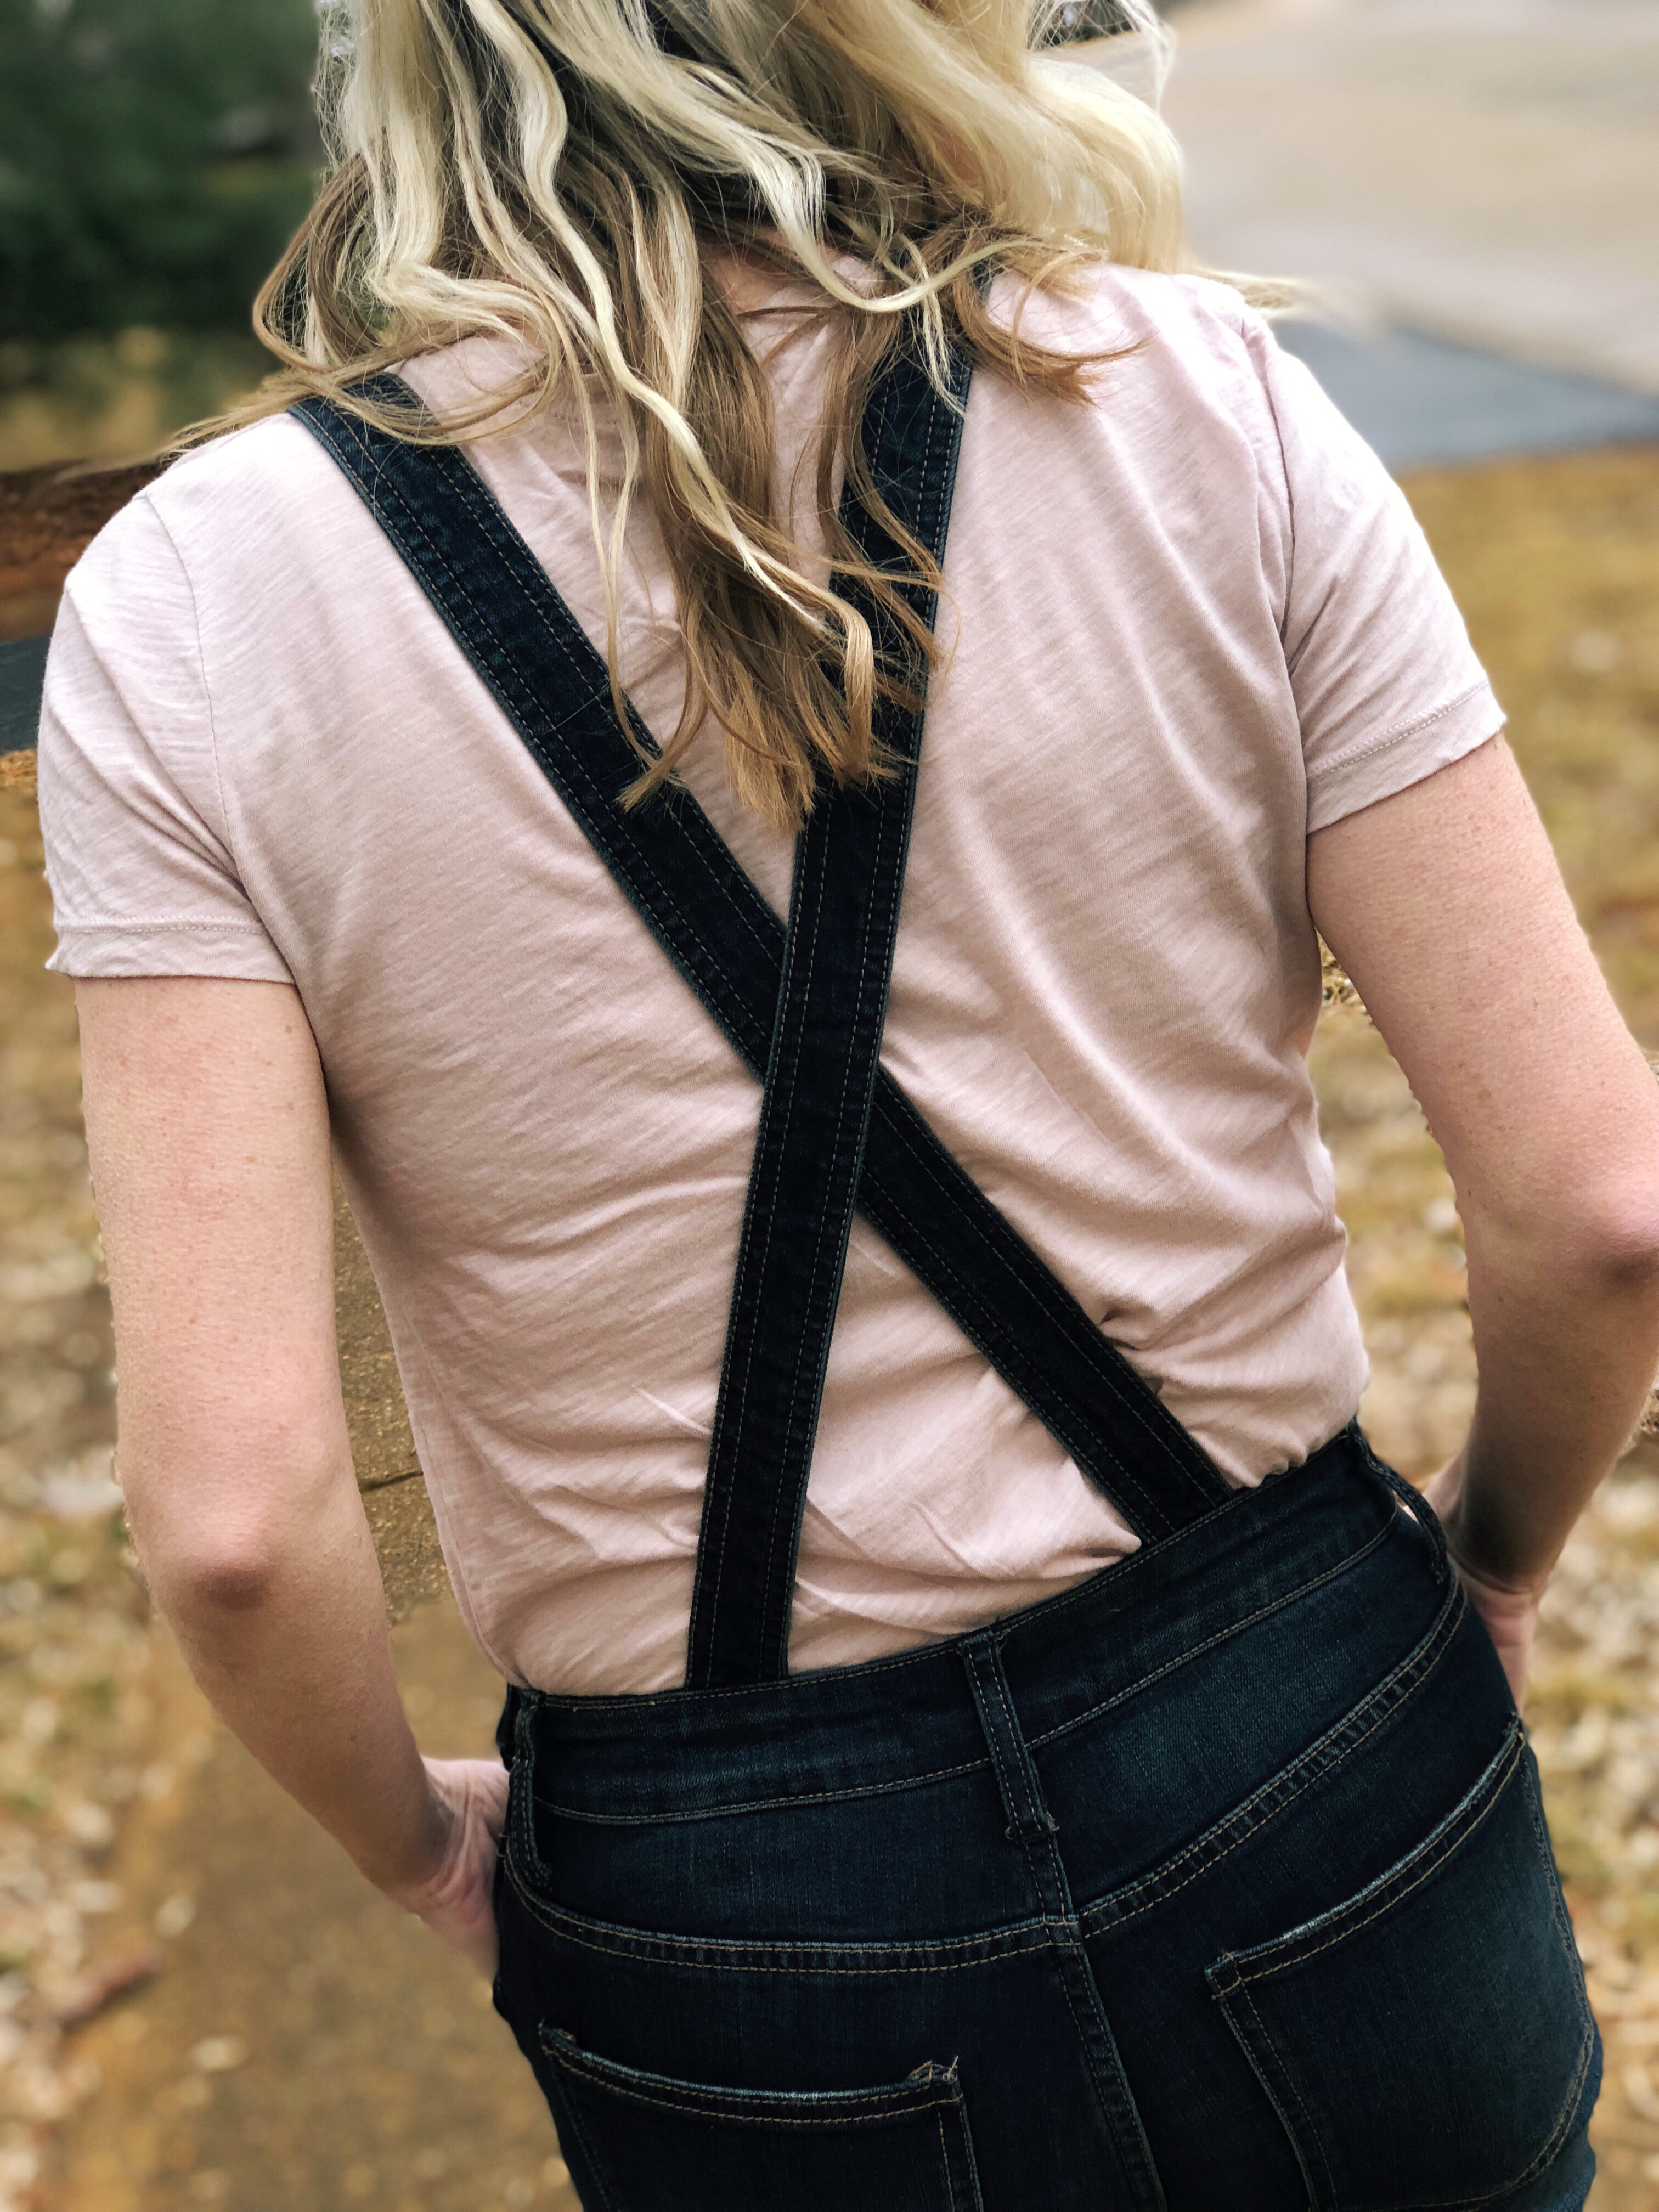 free people denim overalls brady wash  | How to style Free People Overalls featured by top Missouri fashion blogger, Emmy Lou Styles: with a plain tshirt